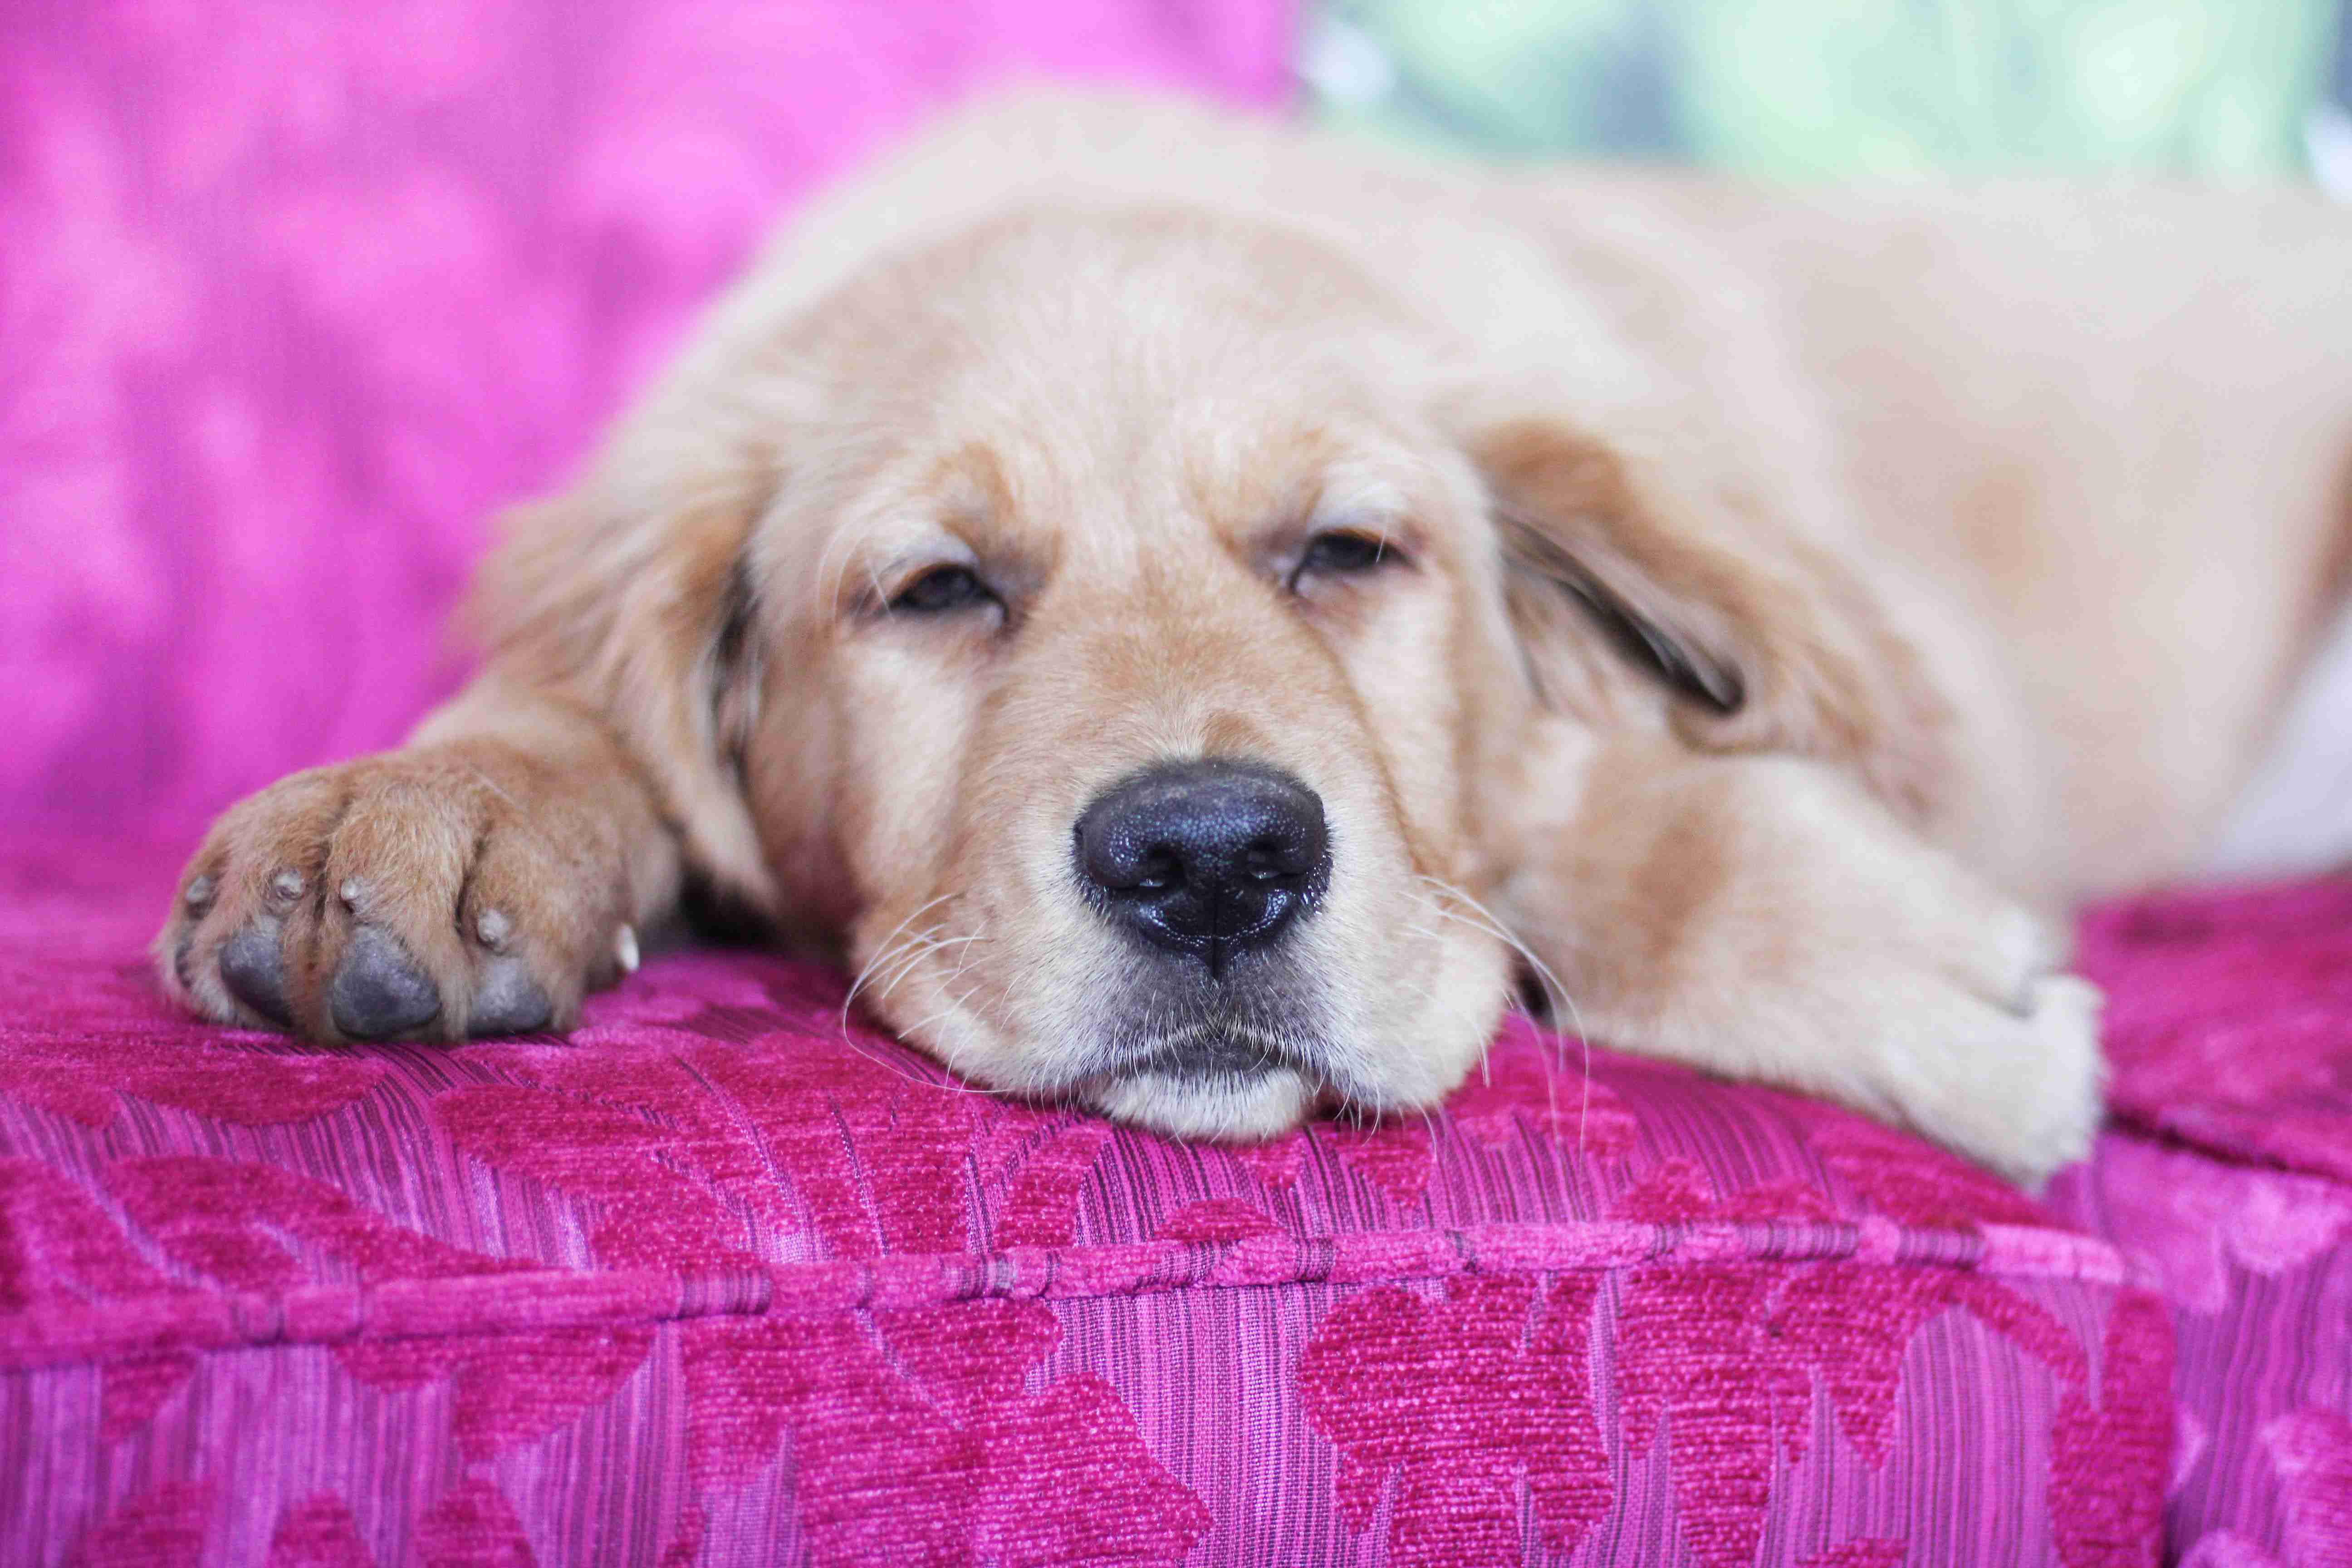 10 Tips to Keep Your Golden Retriever Cool and Comfortable in the Summer Heat